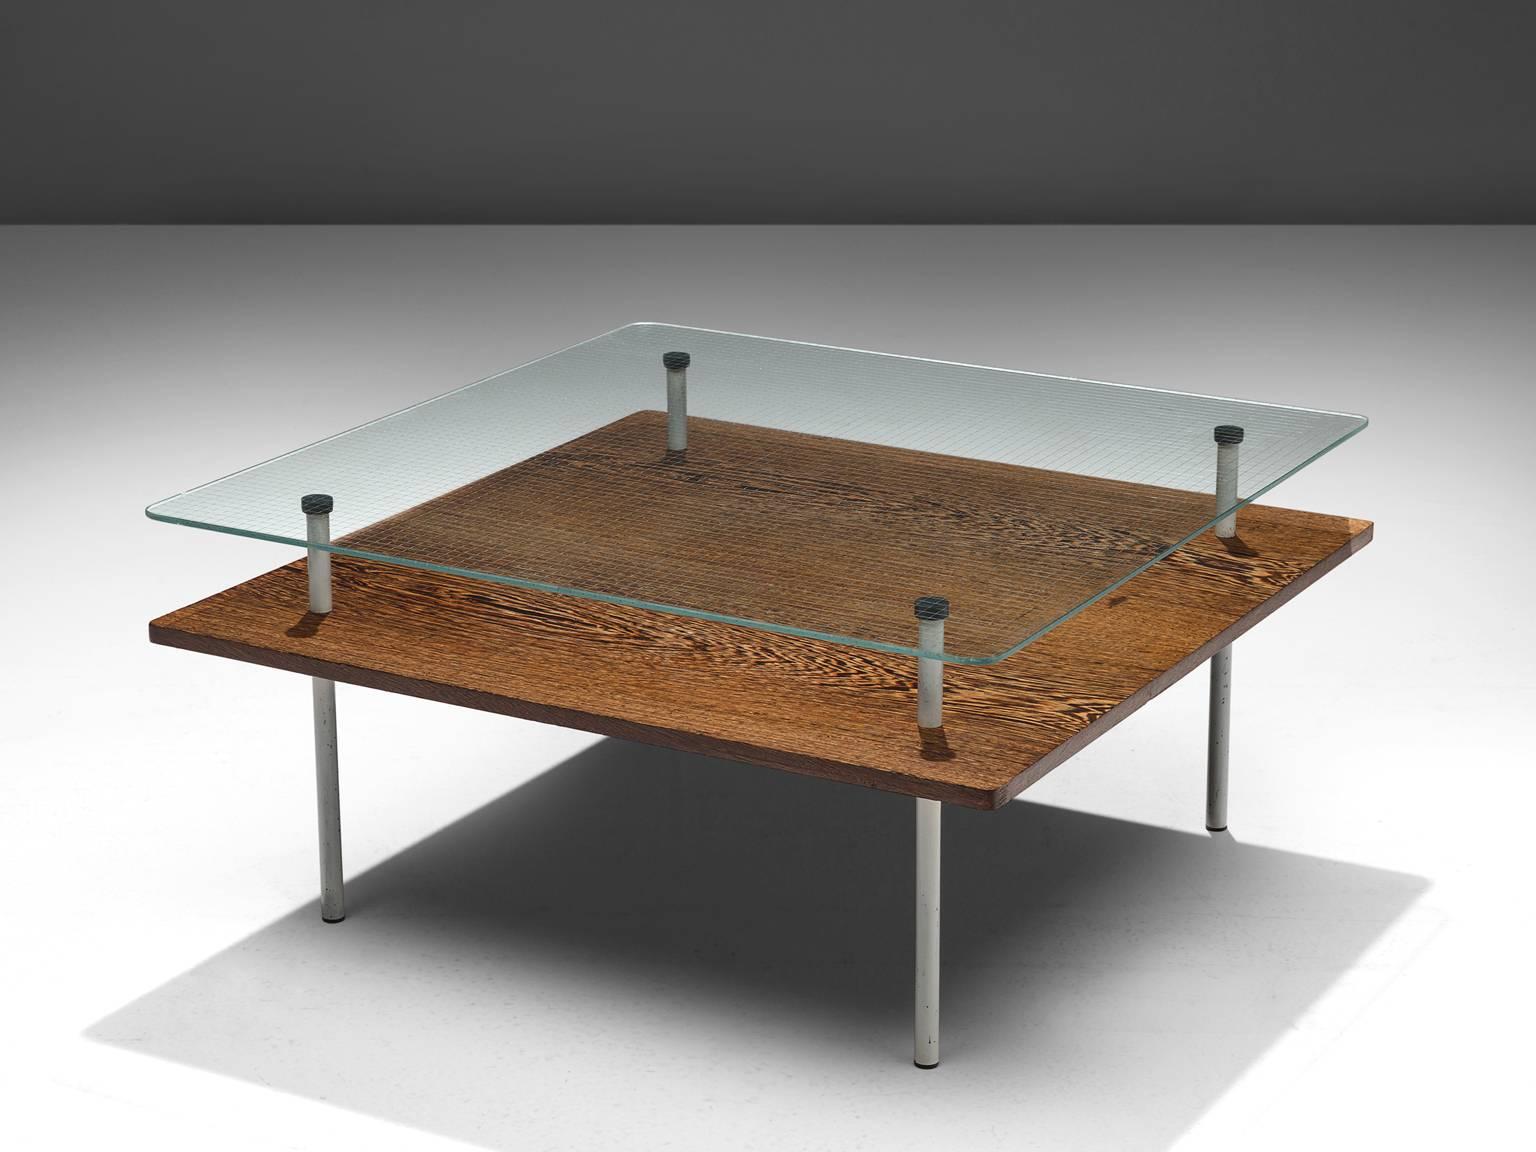 Elmar Berkovich for Metz & Co., coffee table, wengé, white coated metal and reinforced glass, the Netherlands, circa 1935.

This modern cocktail table by designer Elmar Berkovich is made by the Dutch company Metz & Co. An interesting combination